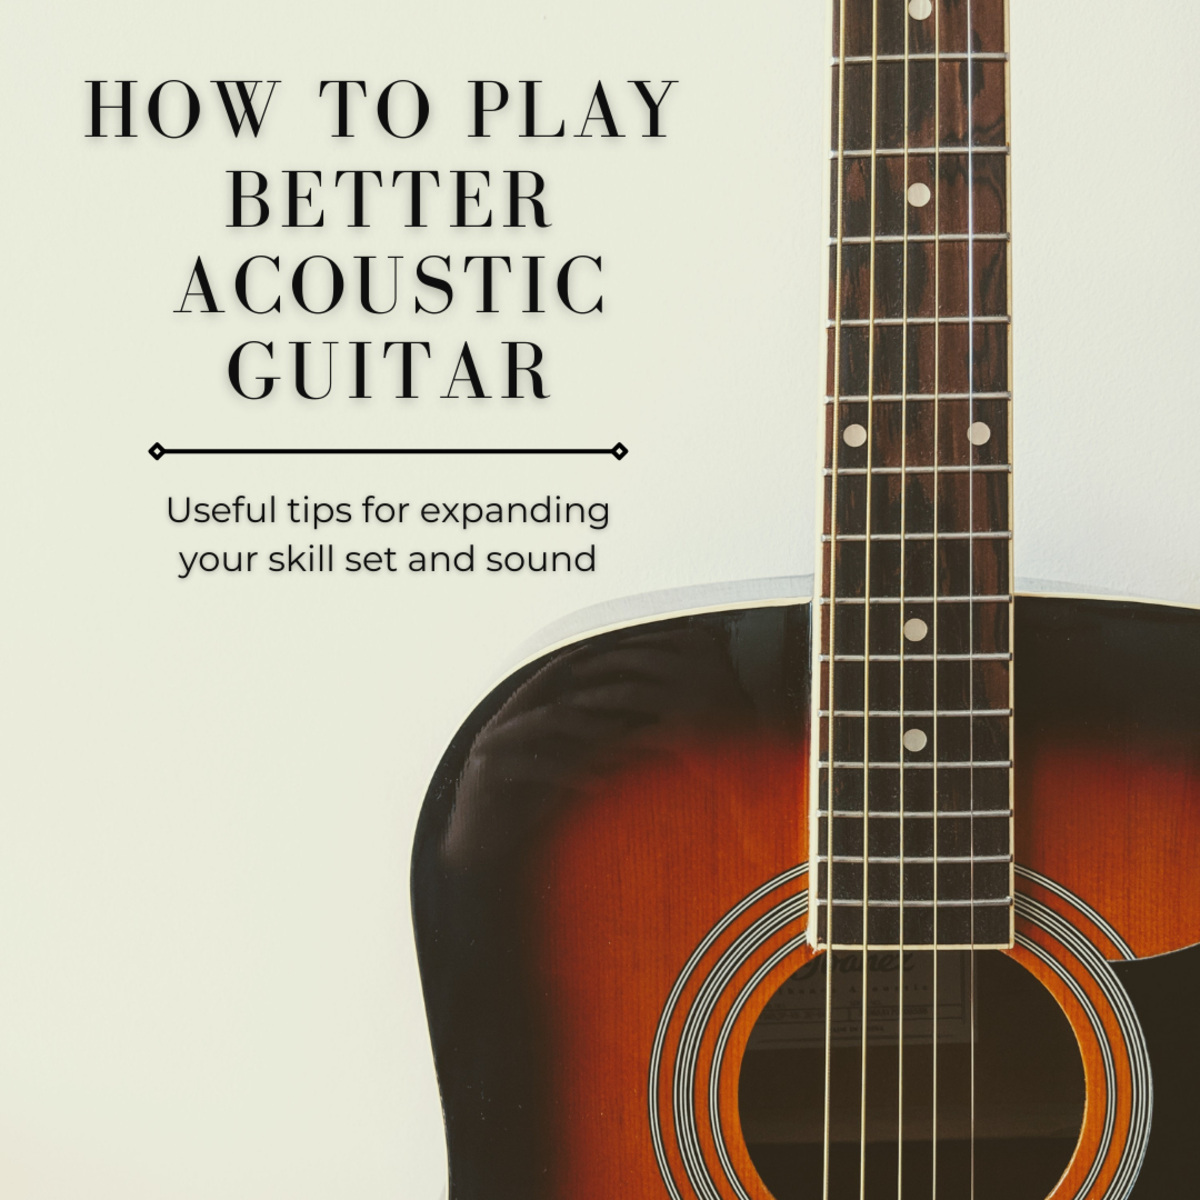 How to Play Better Acoustic Guitar